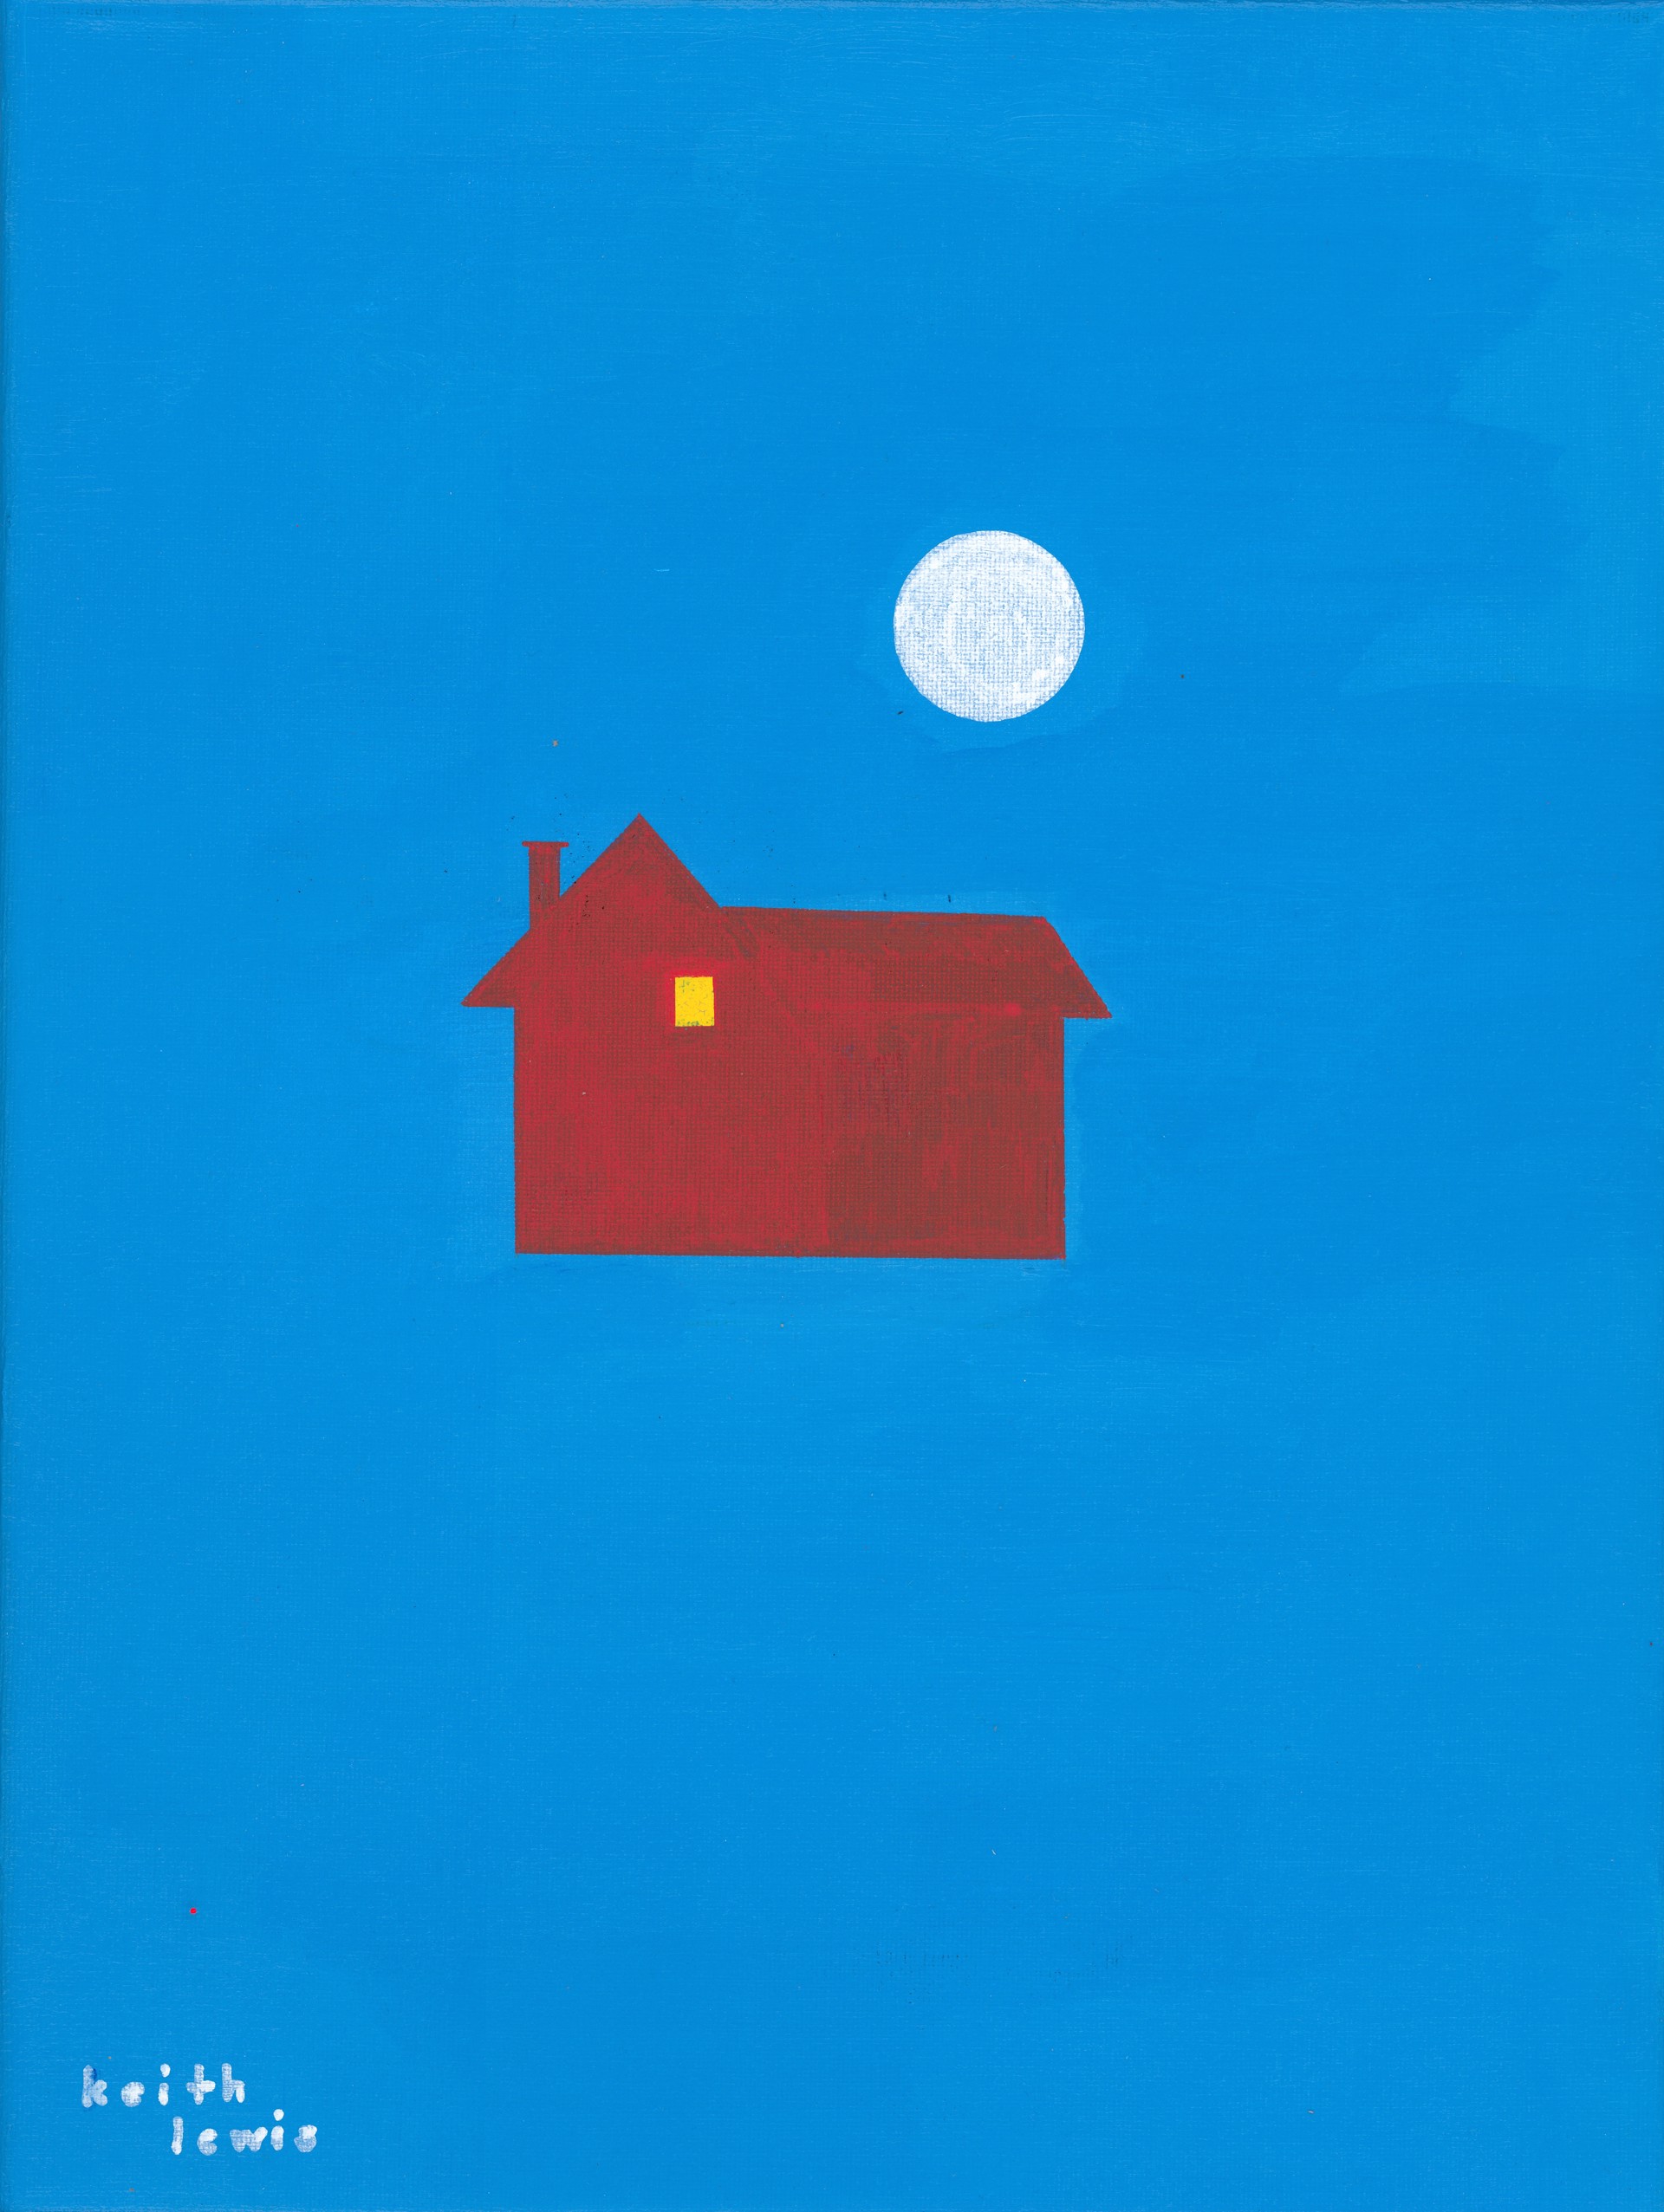 Home Alone 2 with Moon by Keith Lewis